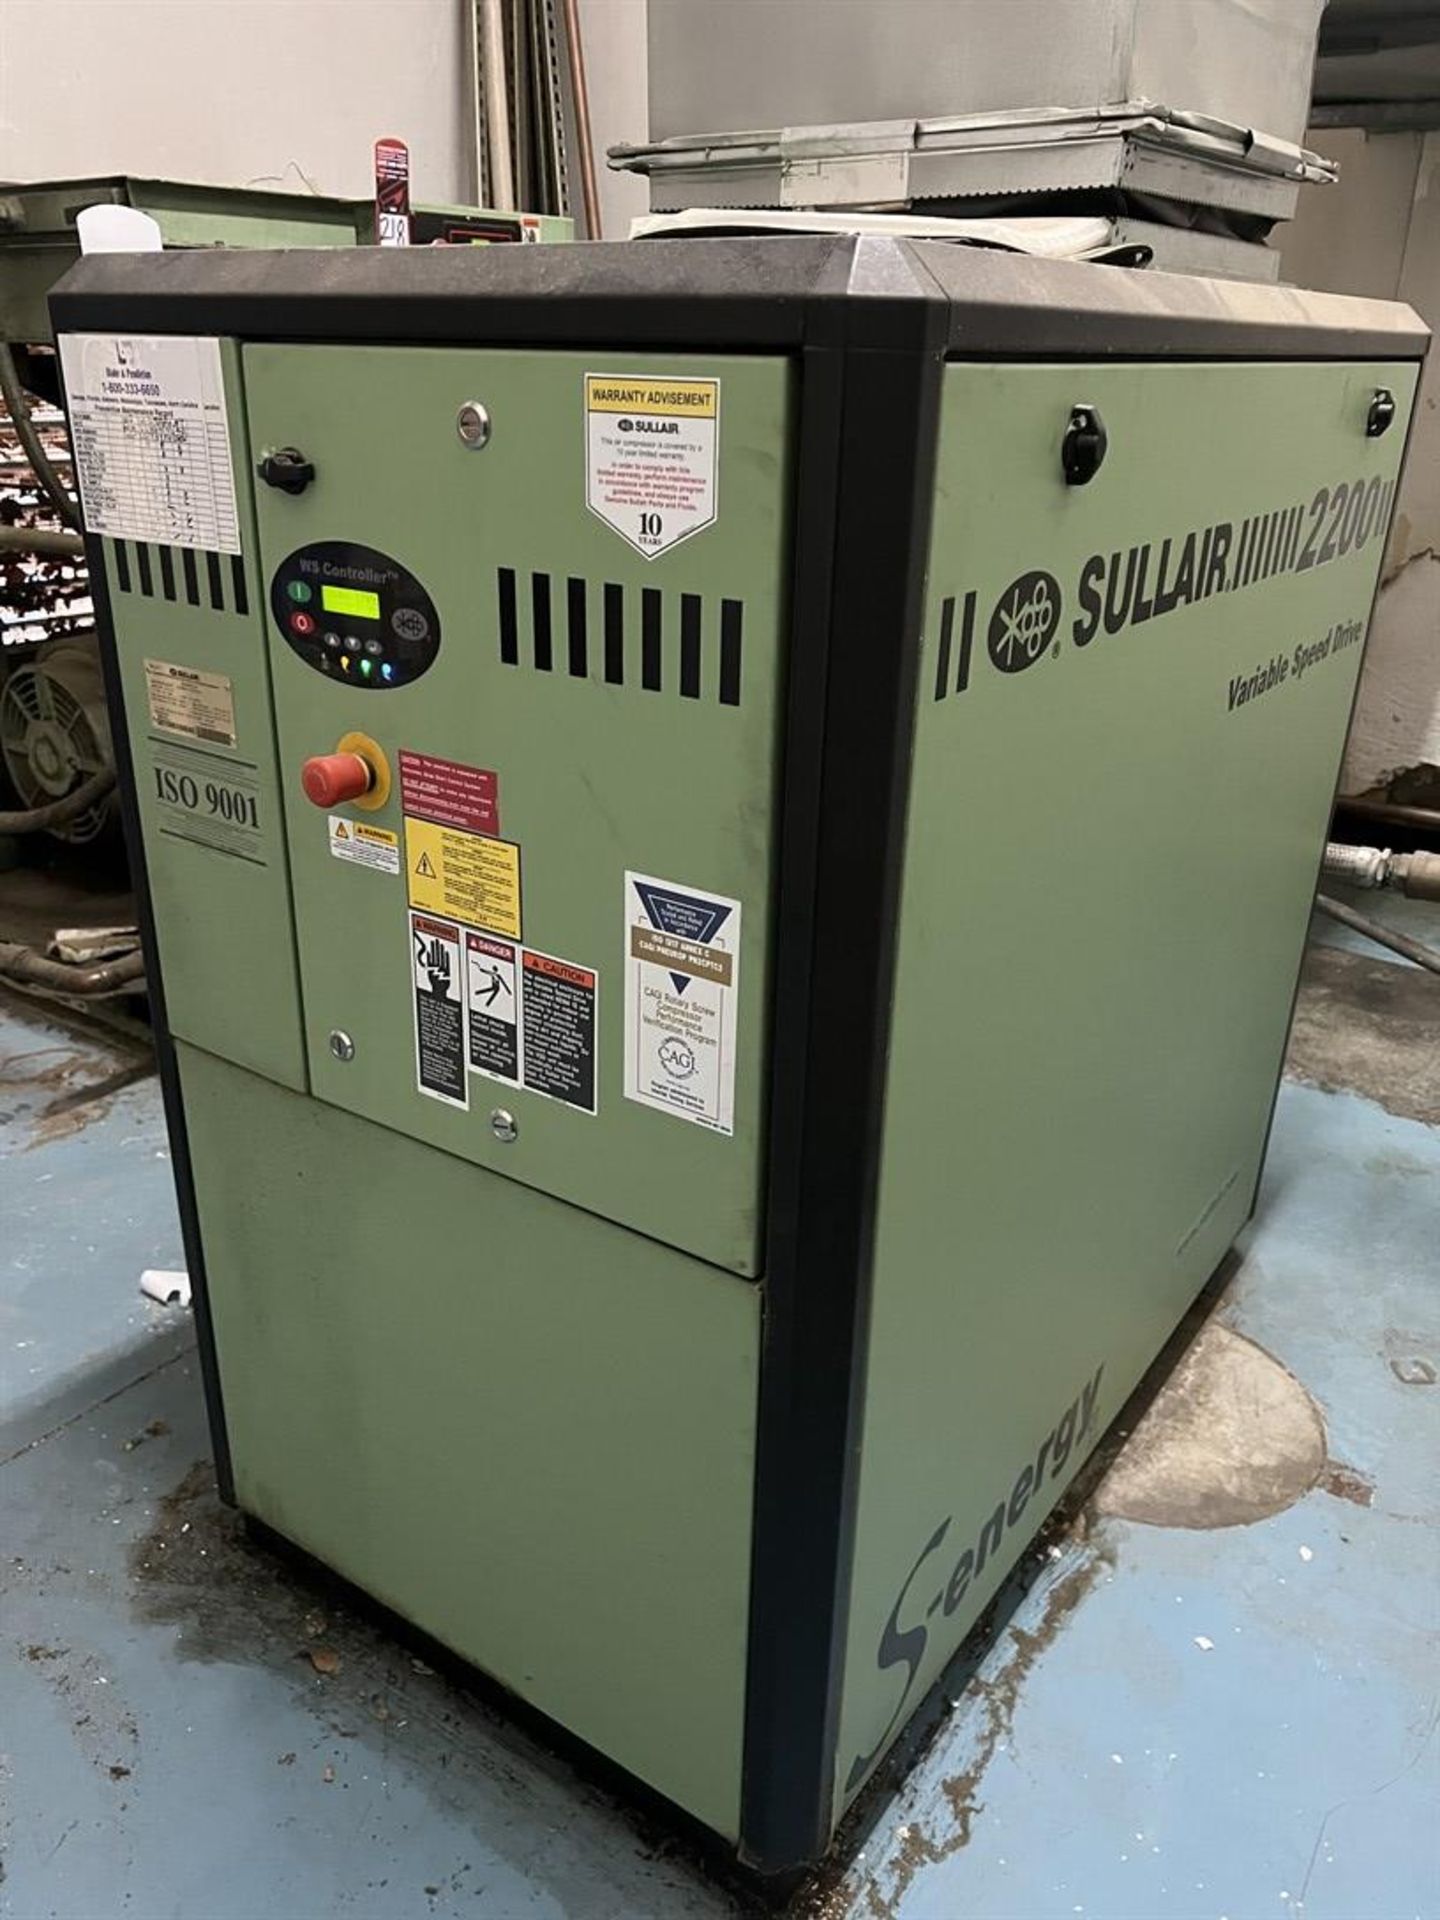 2015 SULLAIR 2200 Series 2212V 34 HP Variable Speed Air Compressor, s/n 201506180045, 175/185 PSI - Image 2 of 5